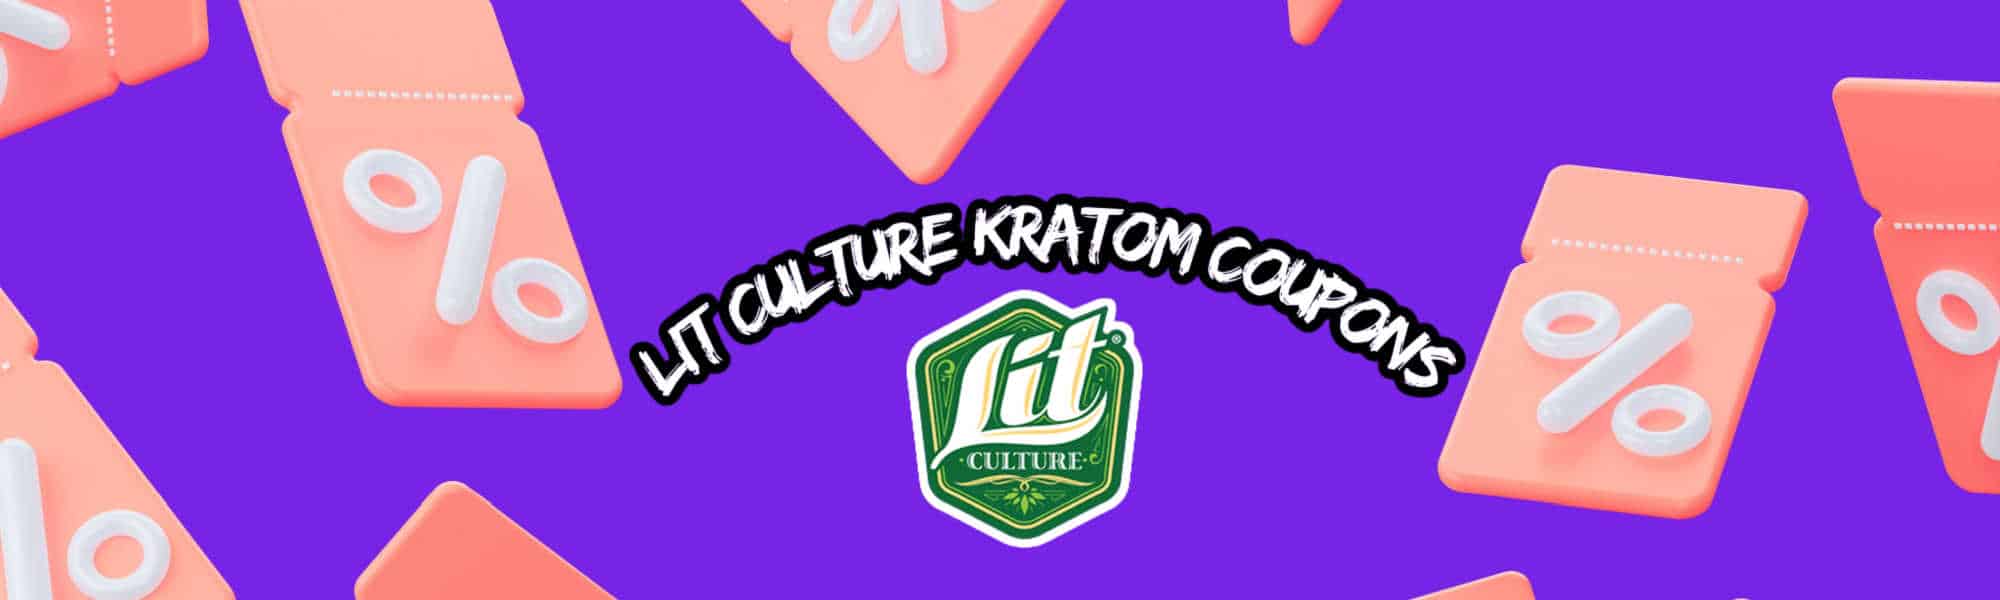 image of lit culture kratom coupons